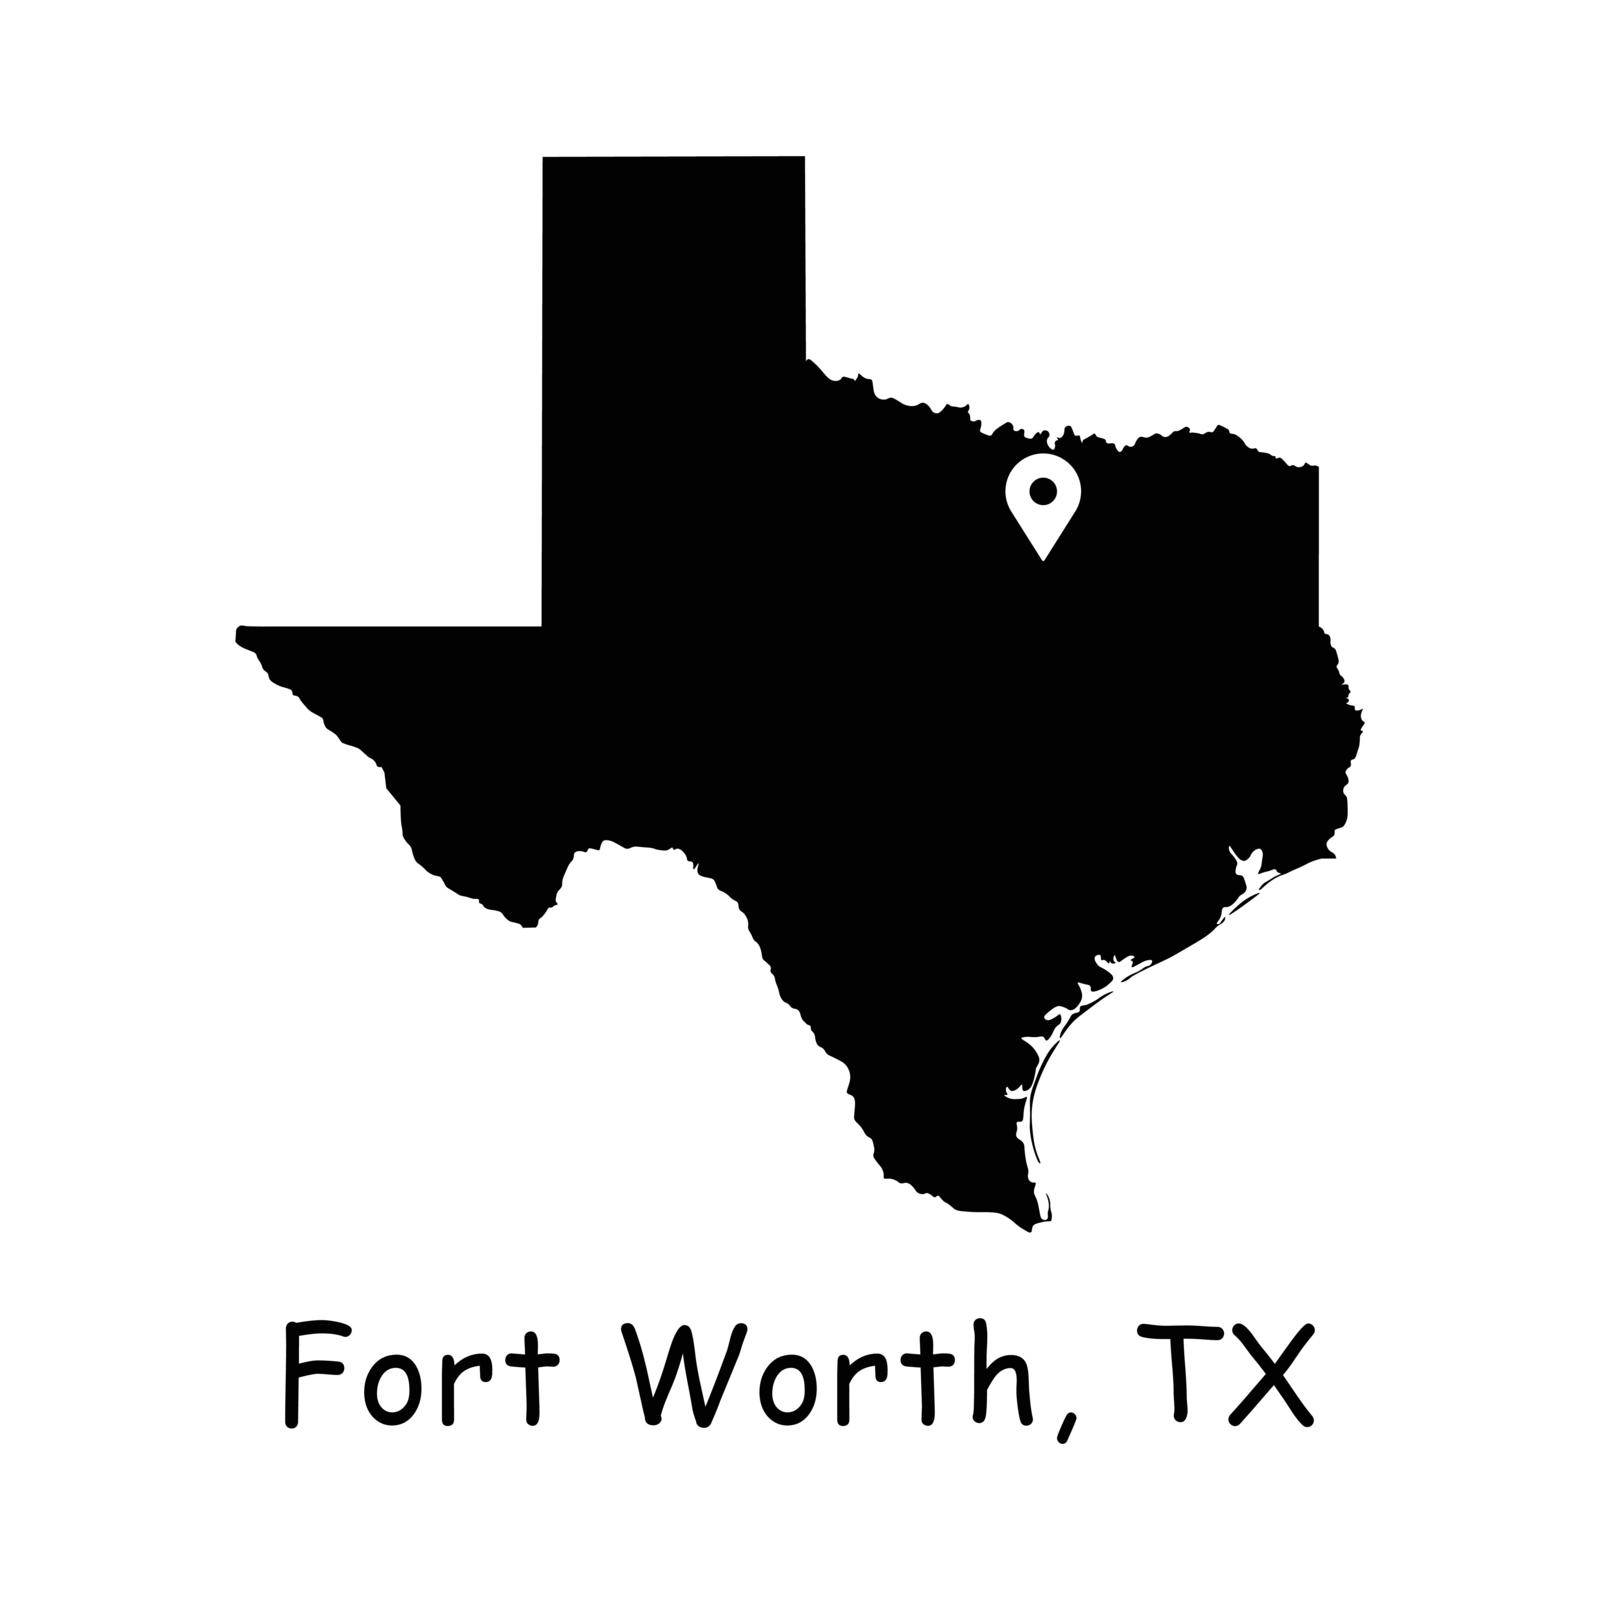 1293 Fort Worth TX on Texas State Map by xileodesigns